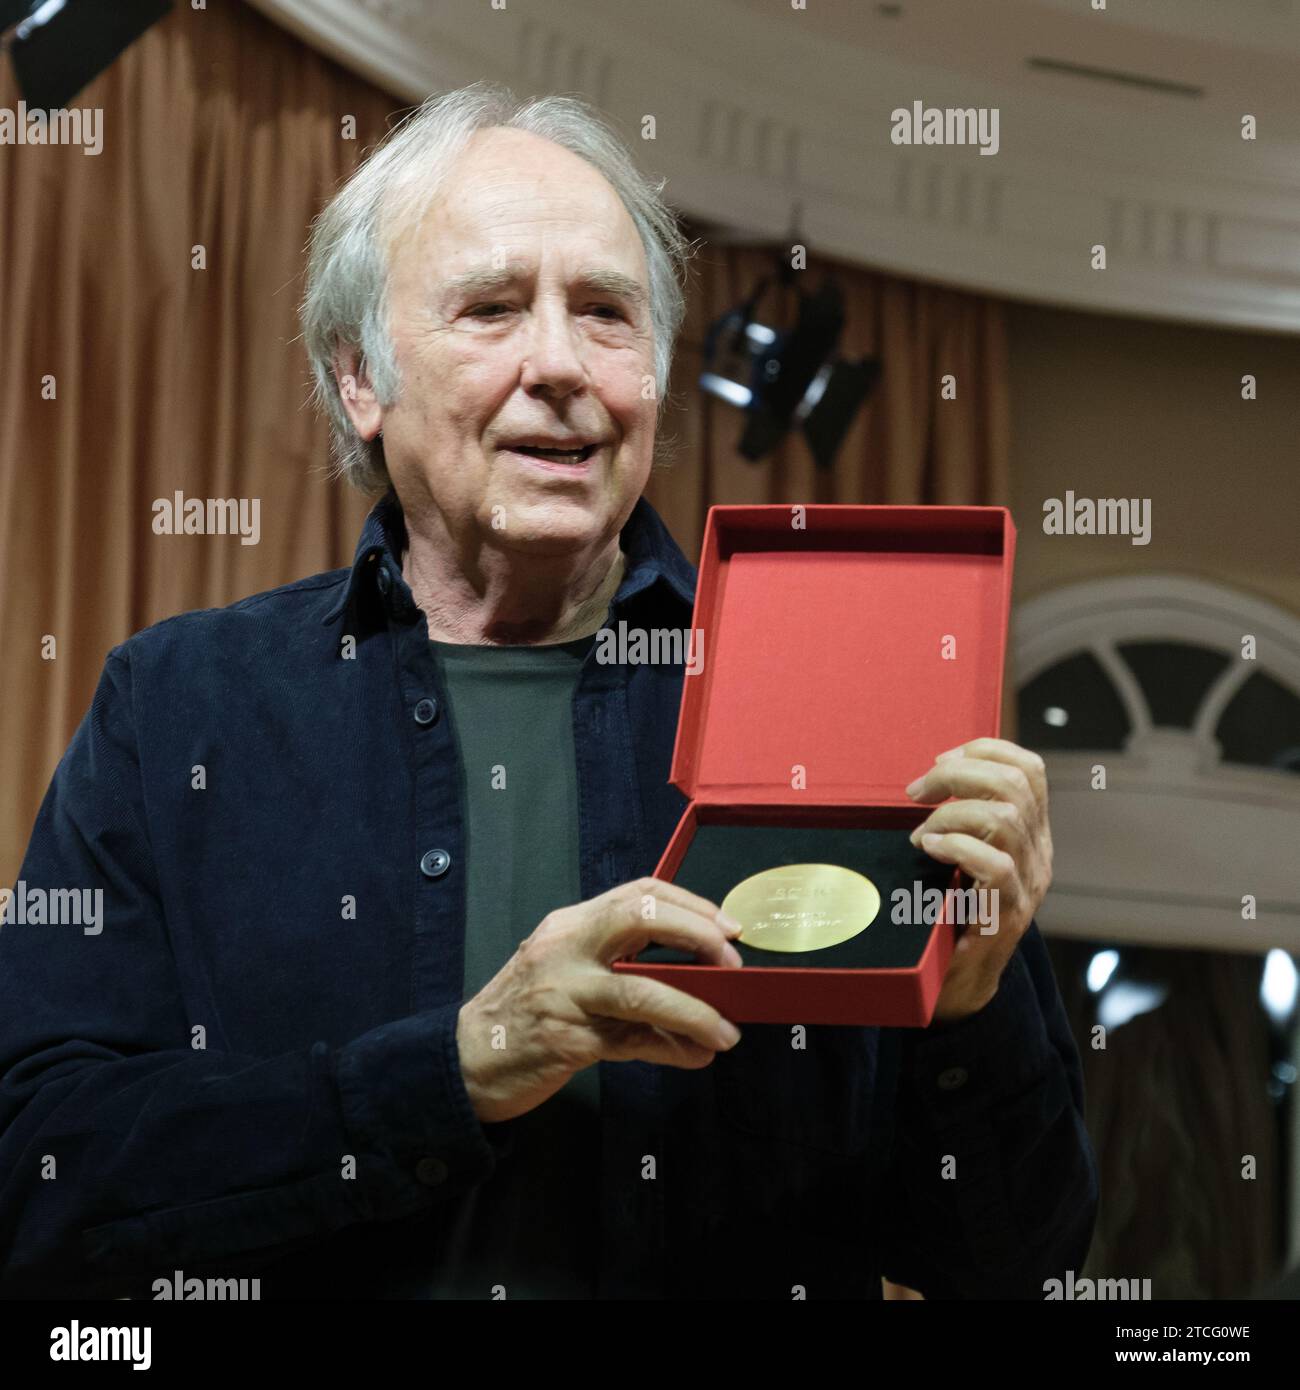 Spanish singer Joan Manuel Serrat receives the SGAE's Medal of Honour at SGAE (General Society of Authors and Editors) on December 12, 2023 in Madrid, Stock Photo